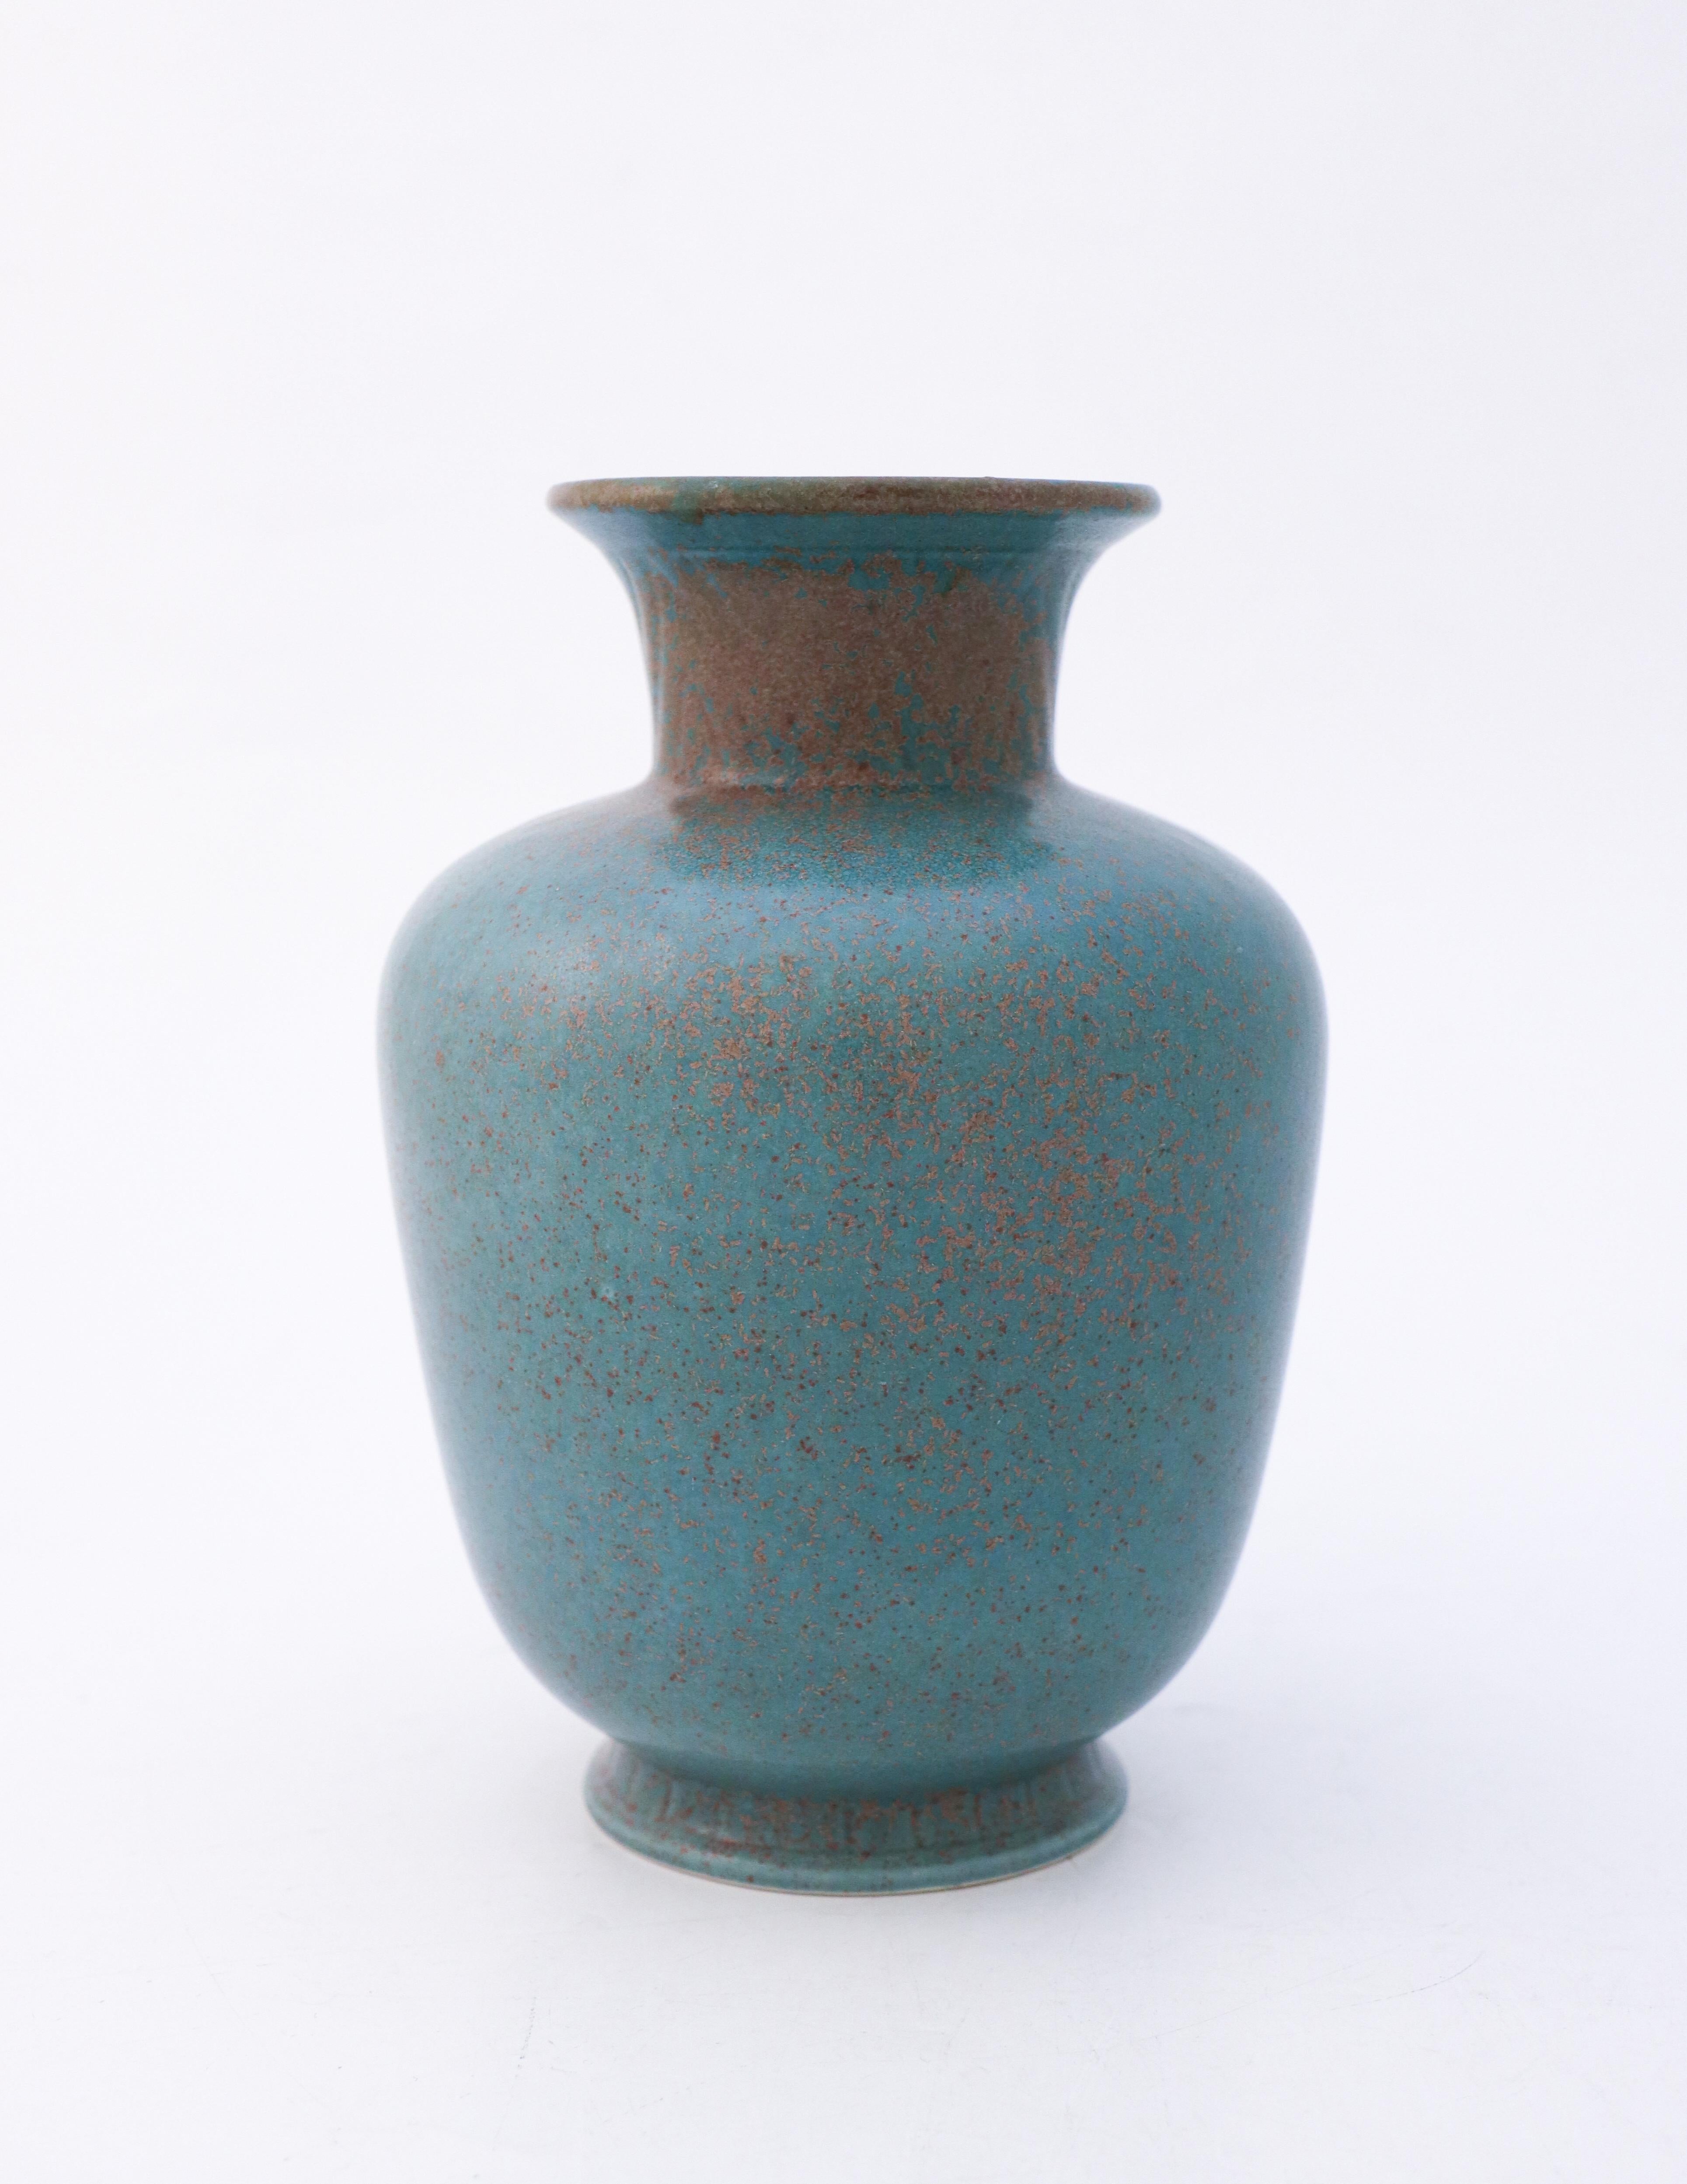 A vase with an amazing green / dark turquoise speckled glaze. This is one of the most popular glazes on Gunnar Nylunds ceramics. The vase is designed by Gunnar Nylund at Rörstrand in the Mi 20th century. The vase is 19 cm high (7.6